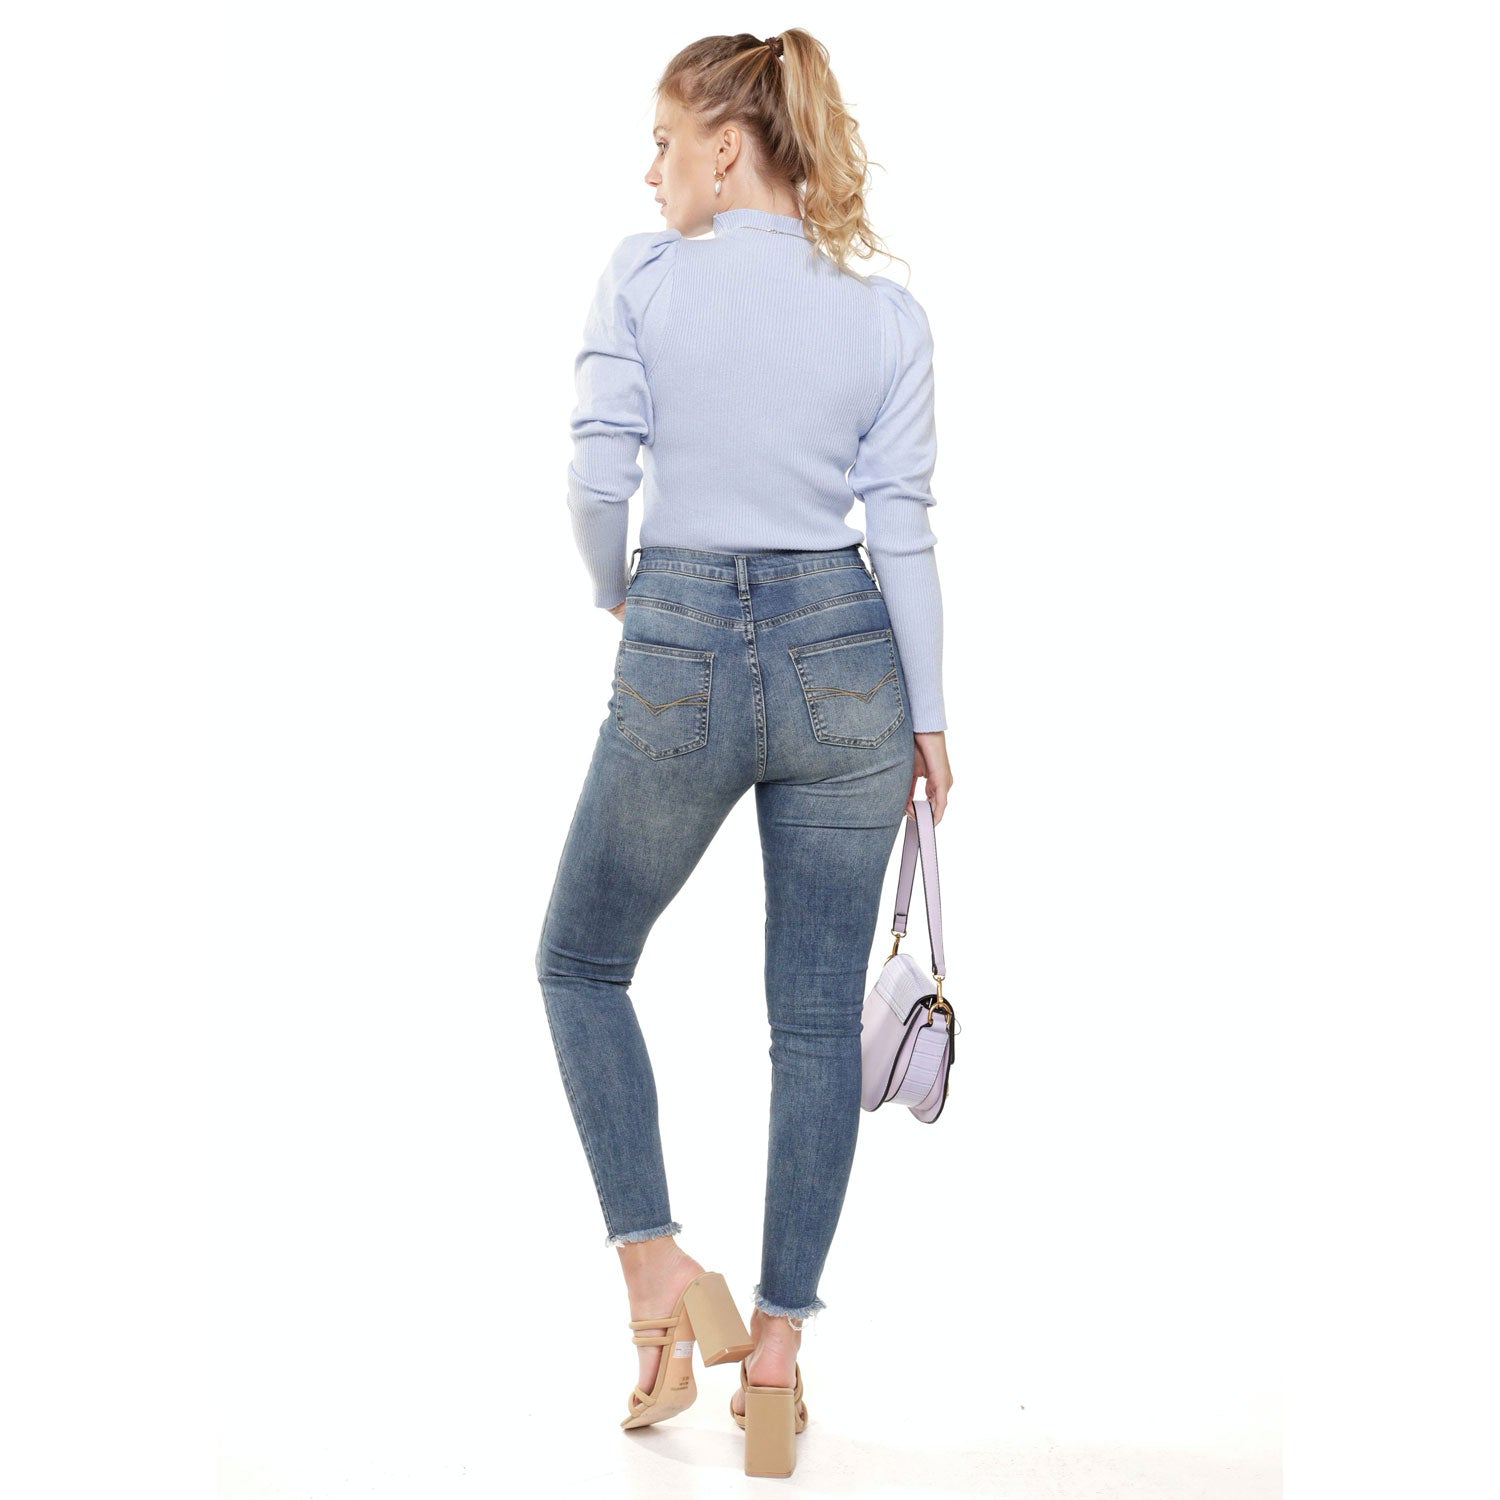 Jeans | Kate - For Models and Mermaids